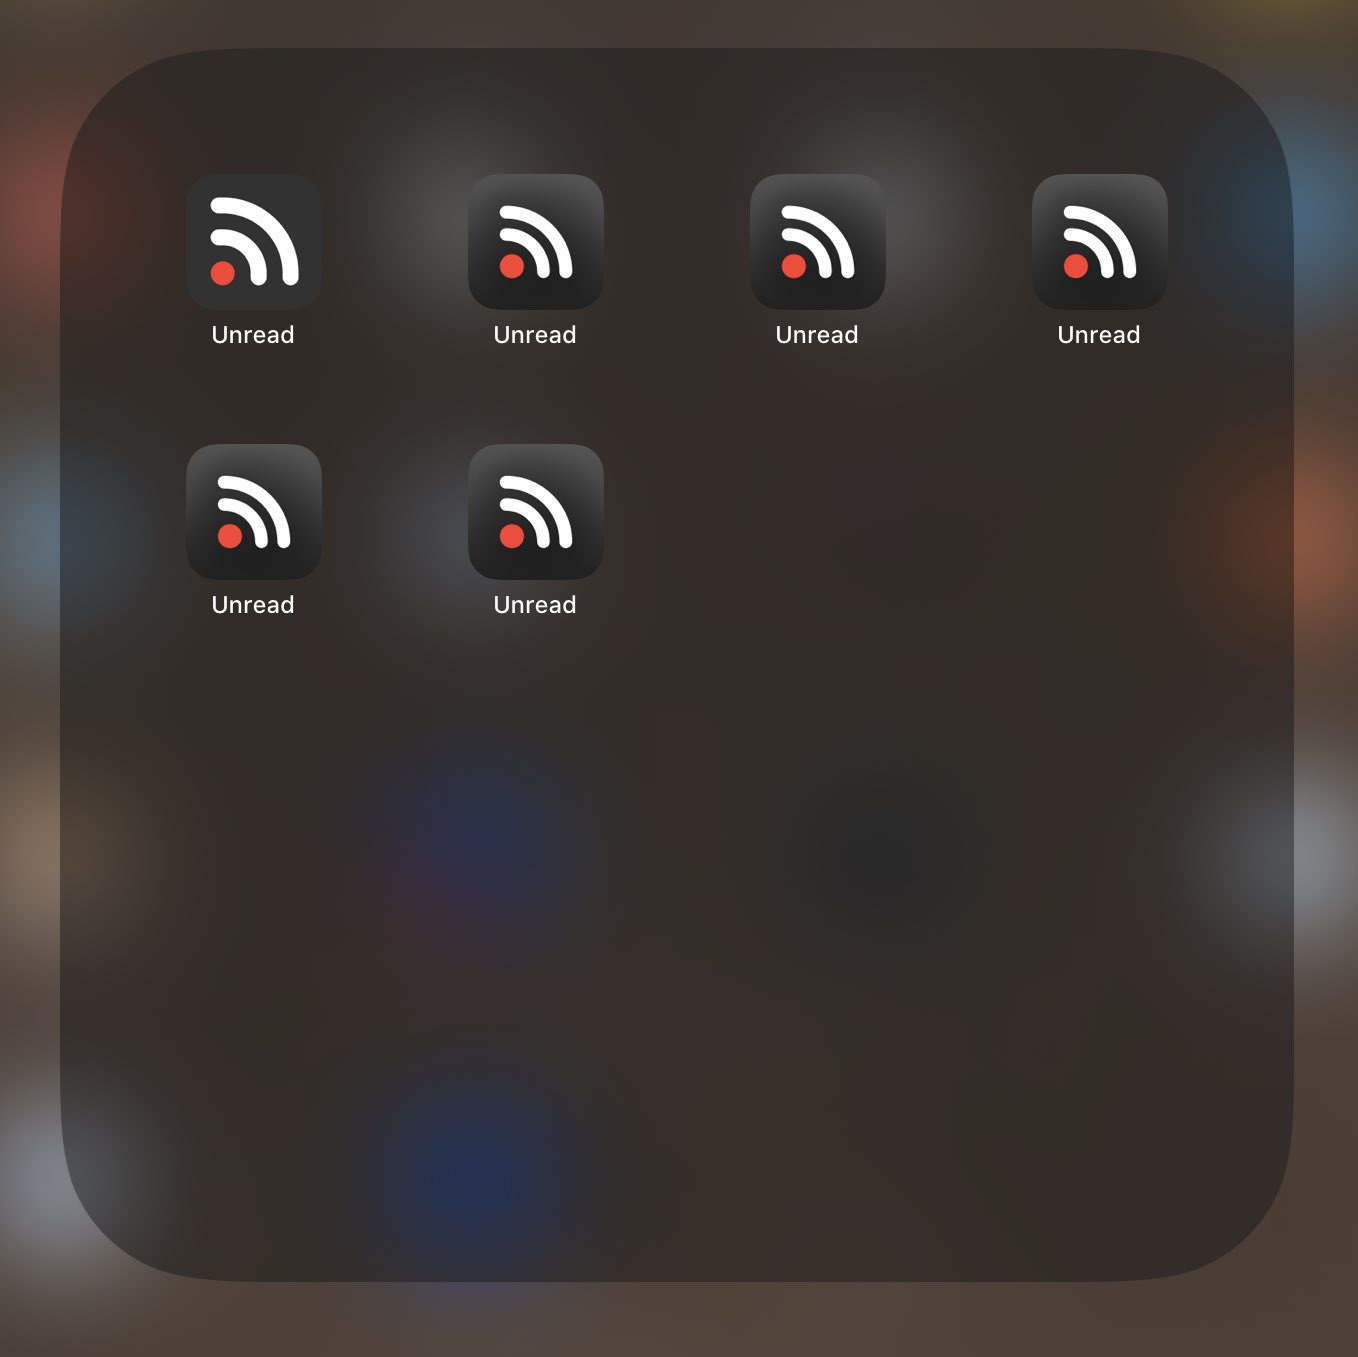 multiple versions of Unread installed at the same time. 